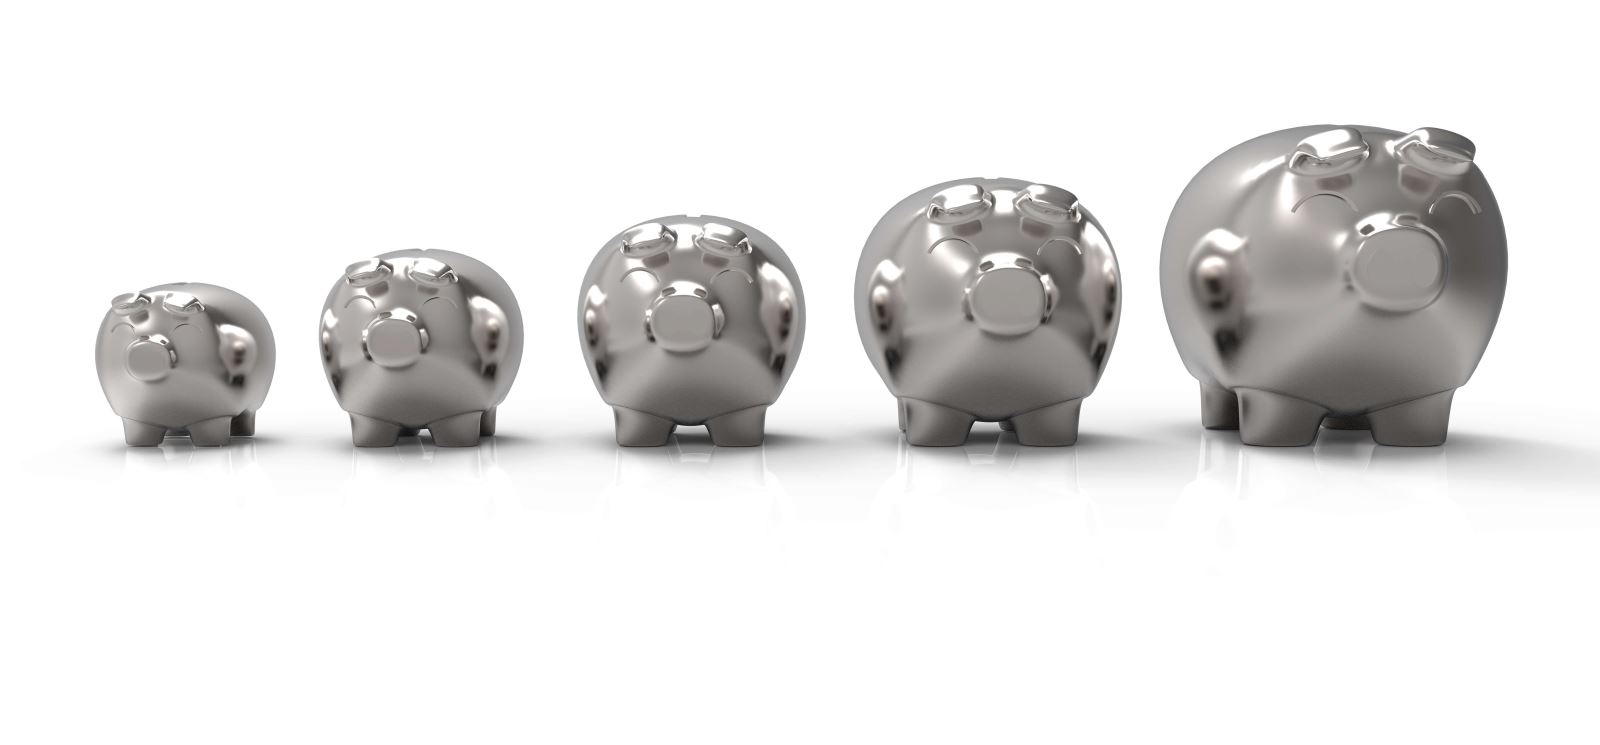 Stock image of silver piggy banks from smaller to a large one